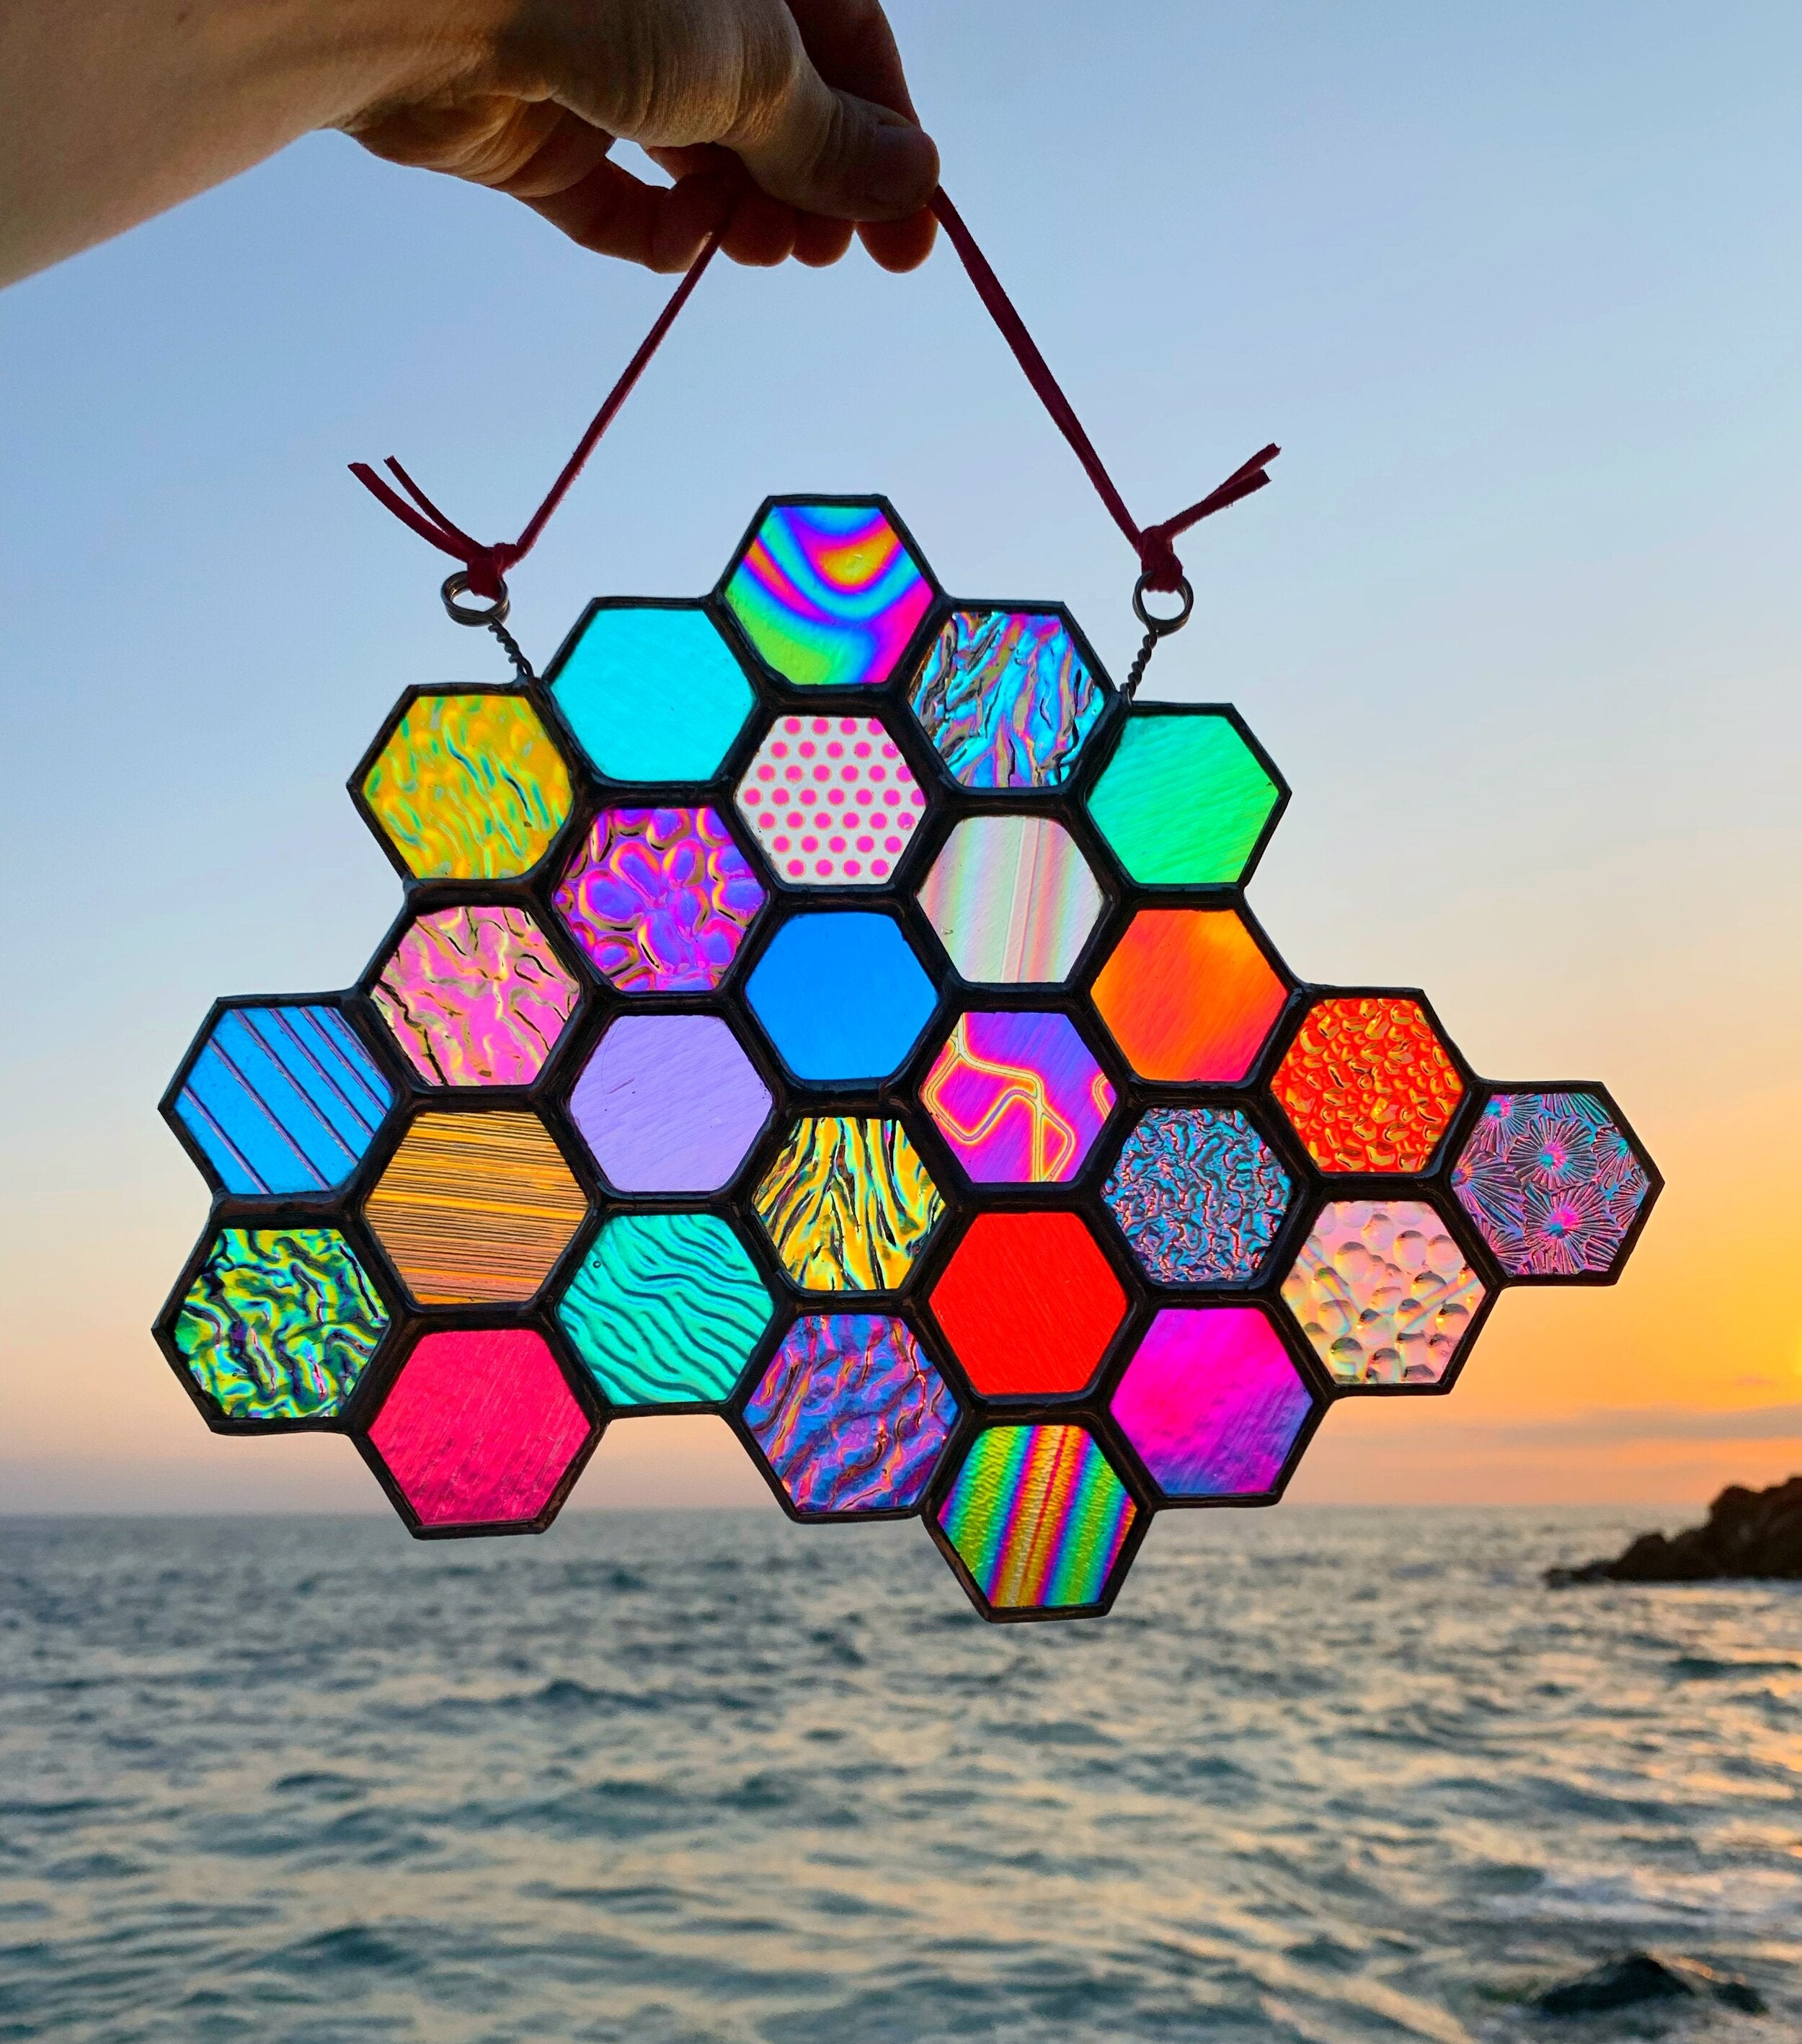 Image of rainbow stained glass art with several different color and pattern hexagons coming together